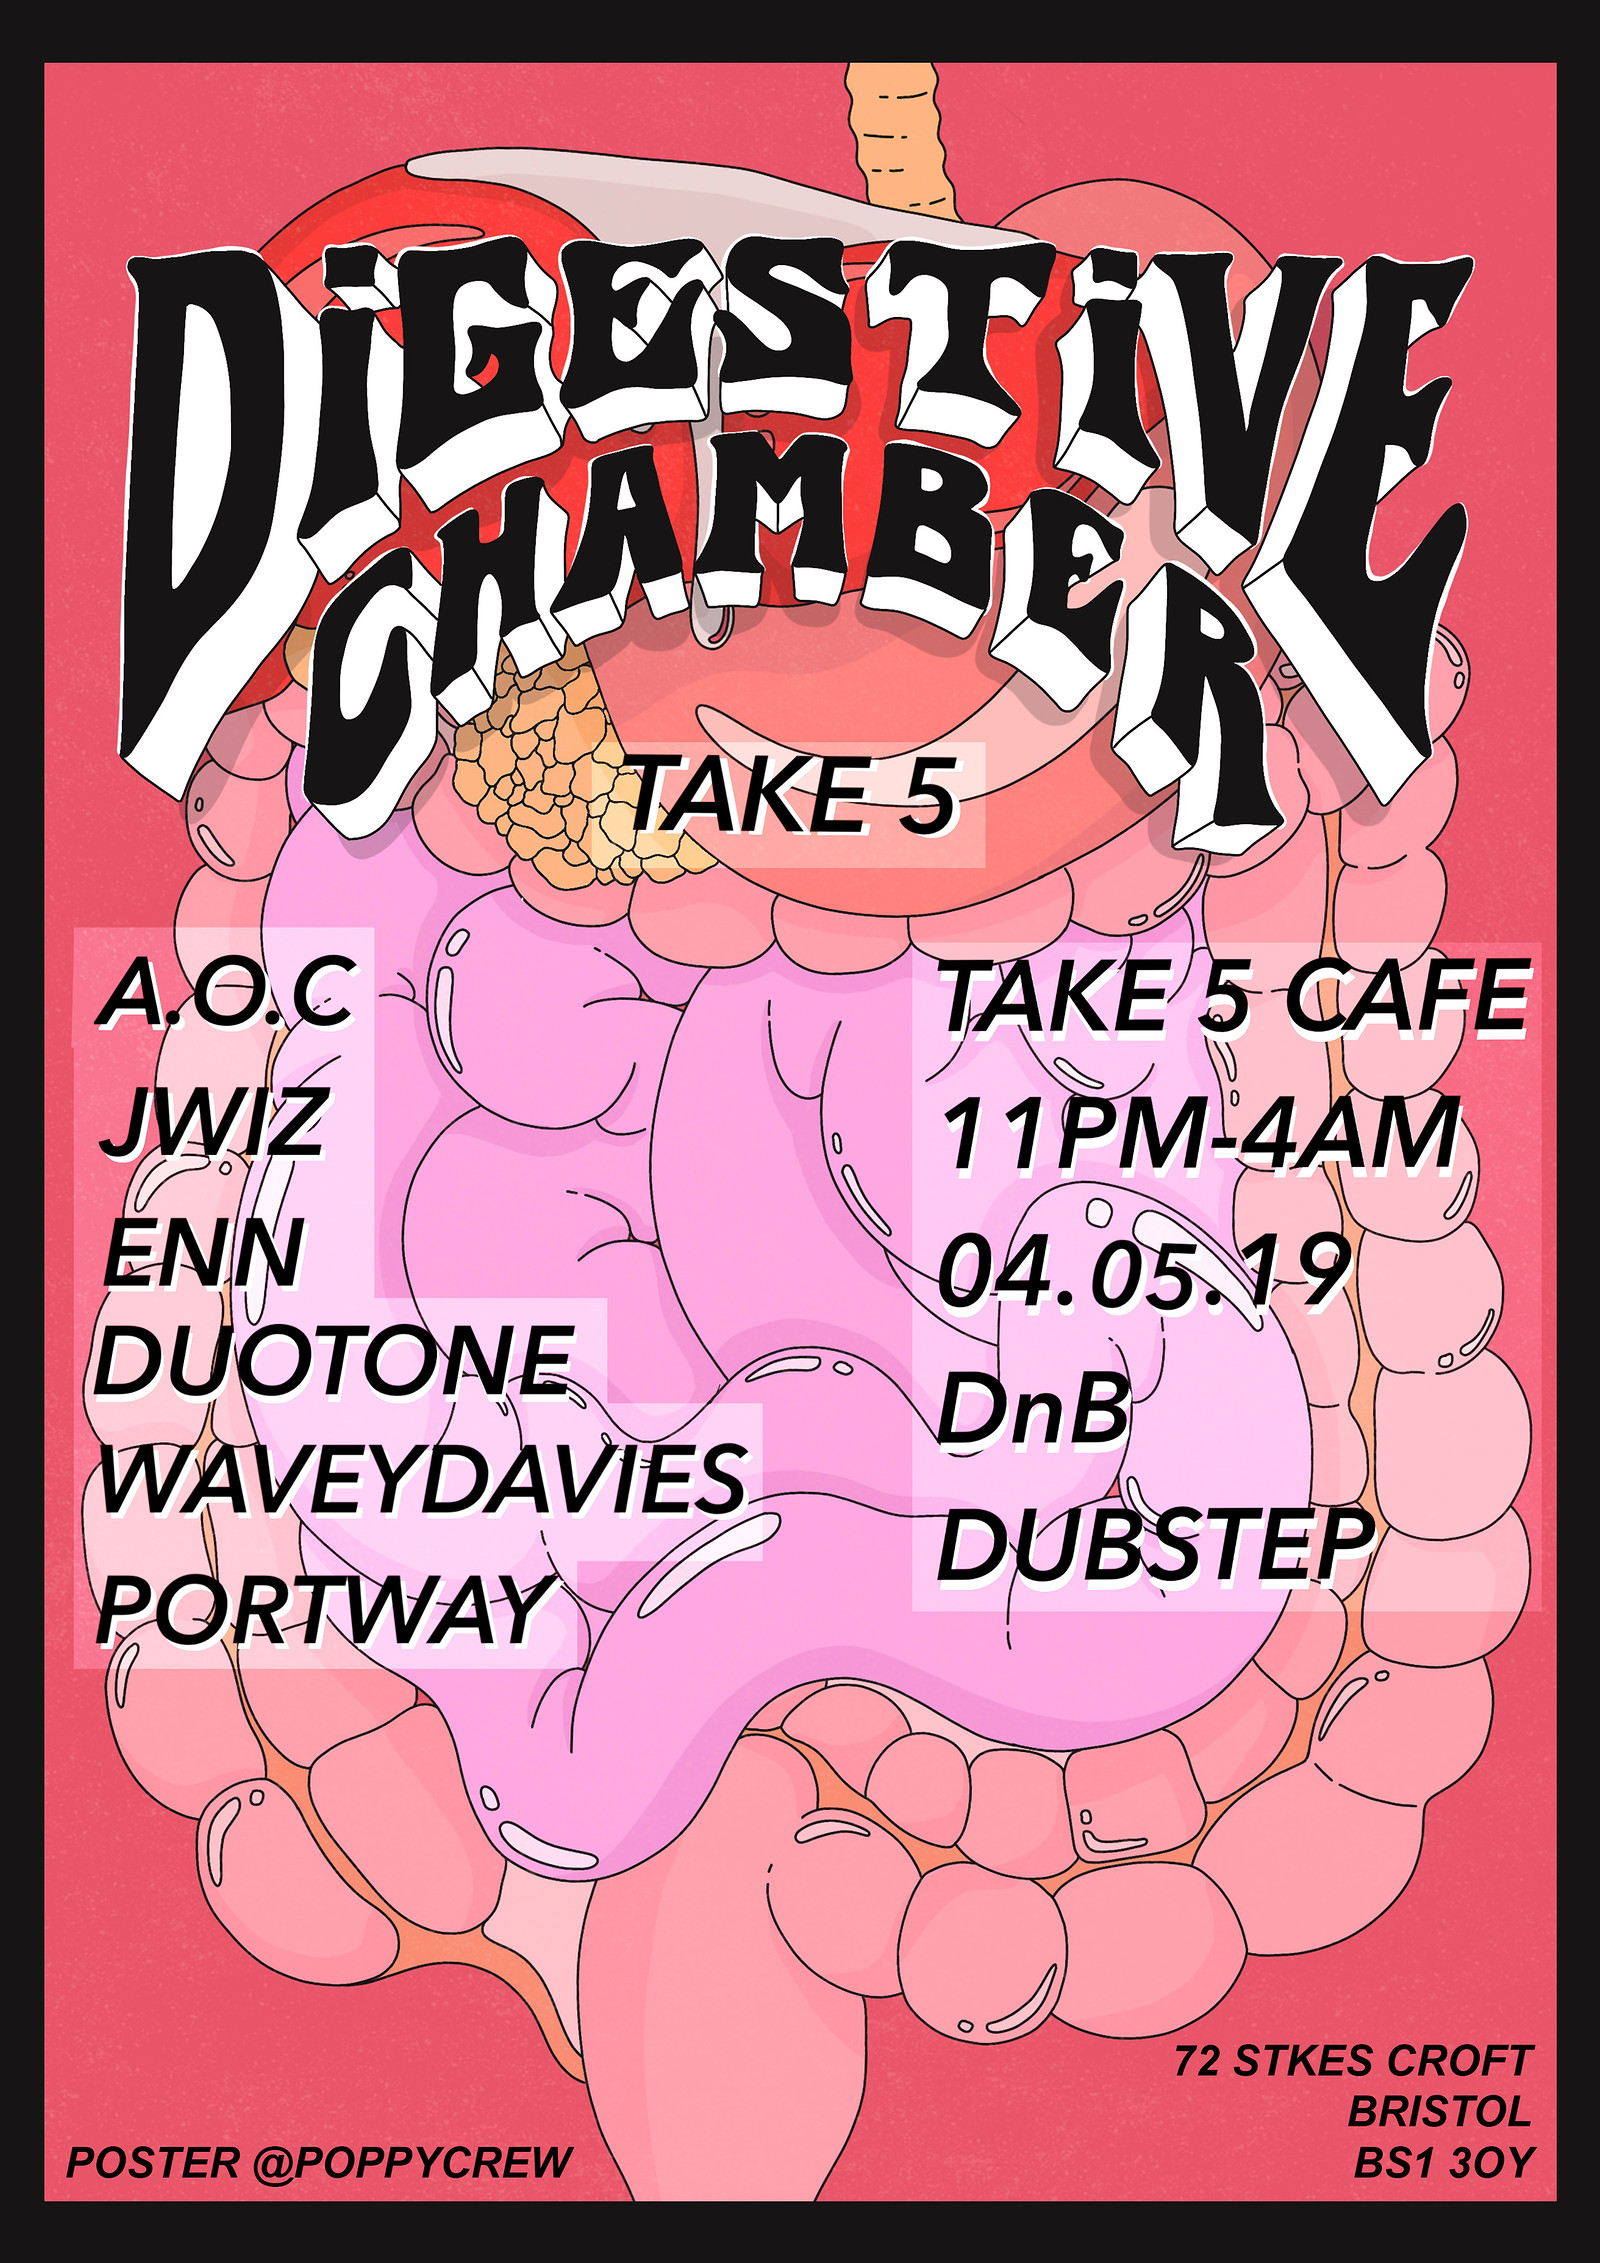 Digestive Chamber 3 at Take Five Cafe